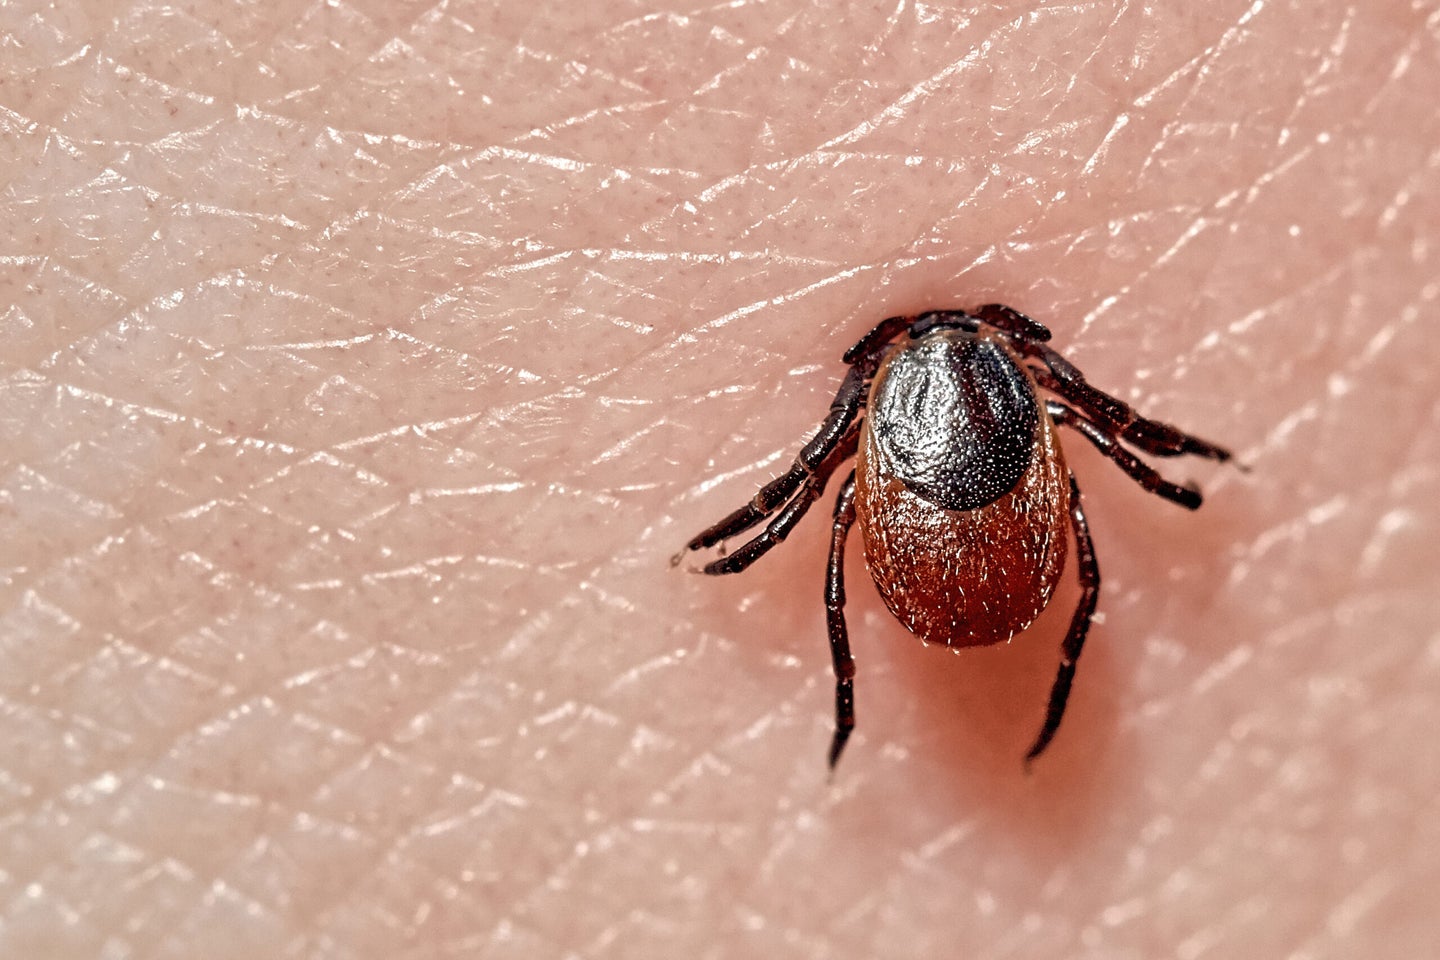 photo of embedded tick